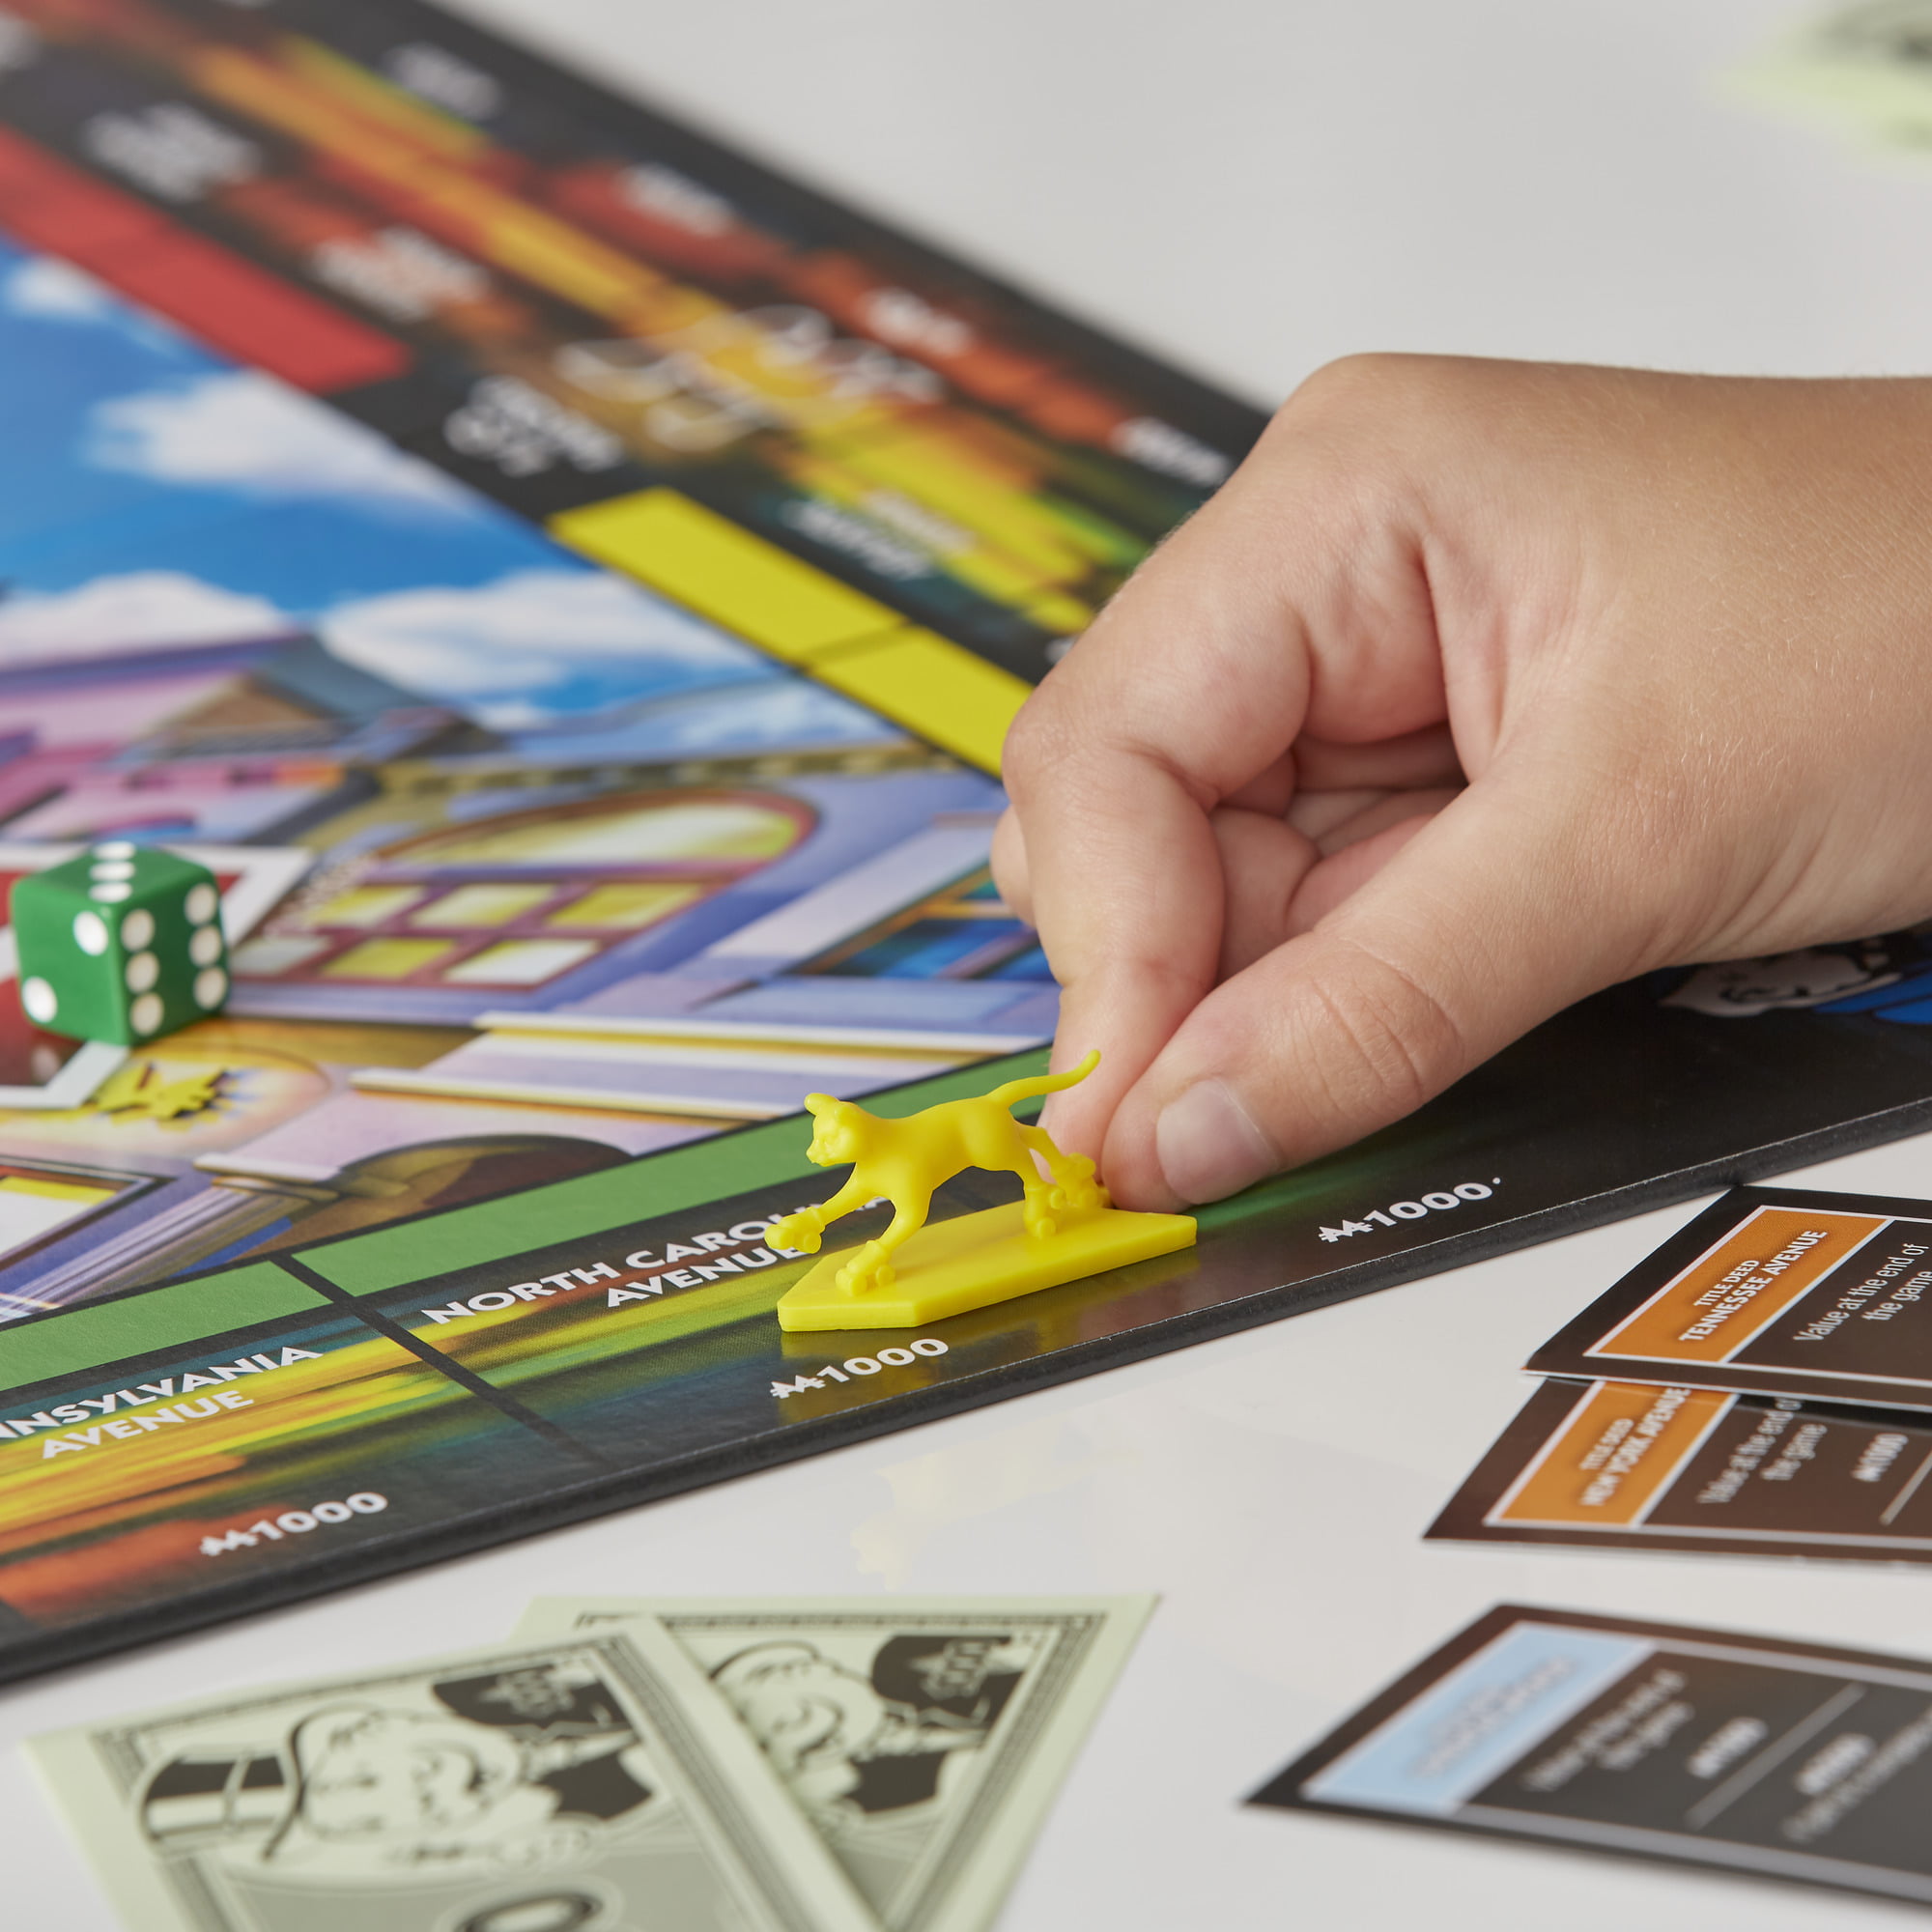 Monopoly Chance Board Game, Fast-Paced Monopoly Game, 20 Min. Average, Ages  8+ 